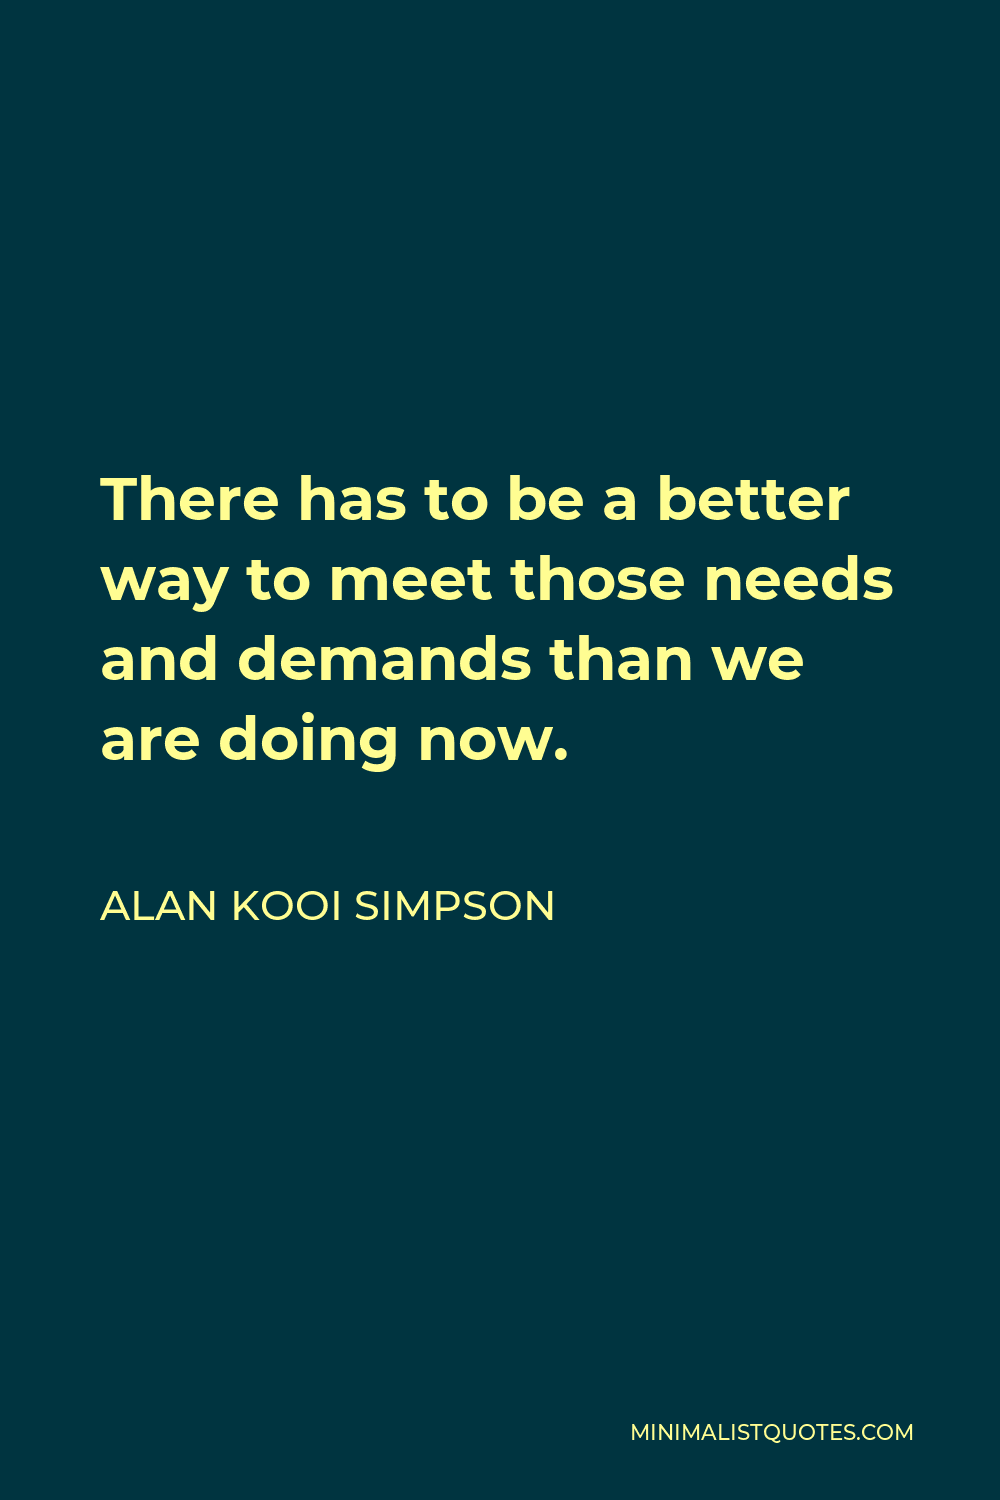 Alan Kooi Simpson Quote - There has to be a better way to meet those needs and demands than we are doing now.